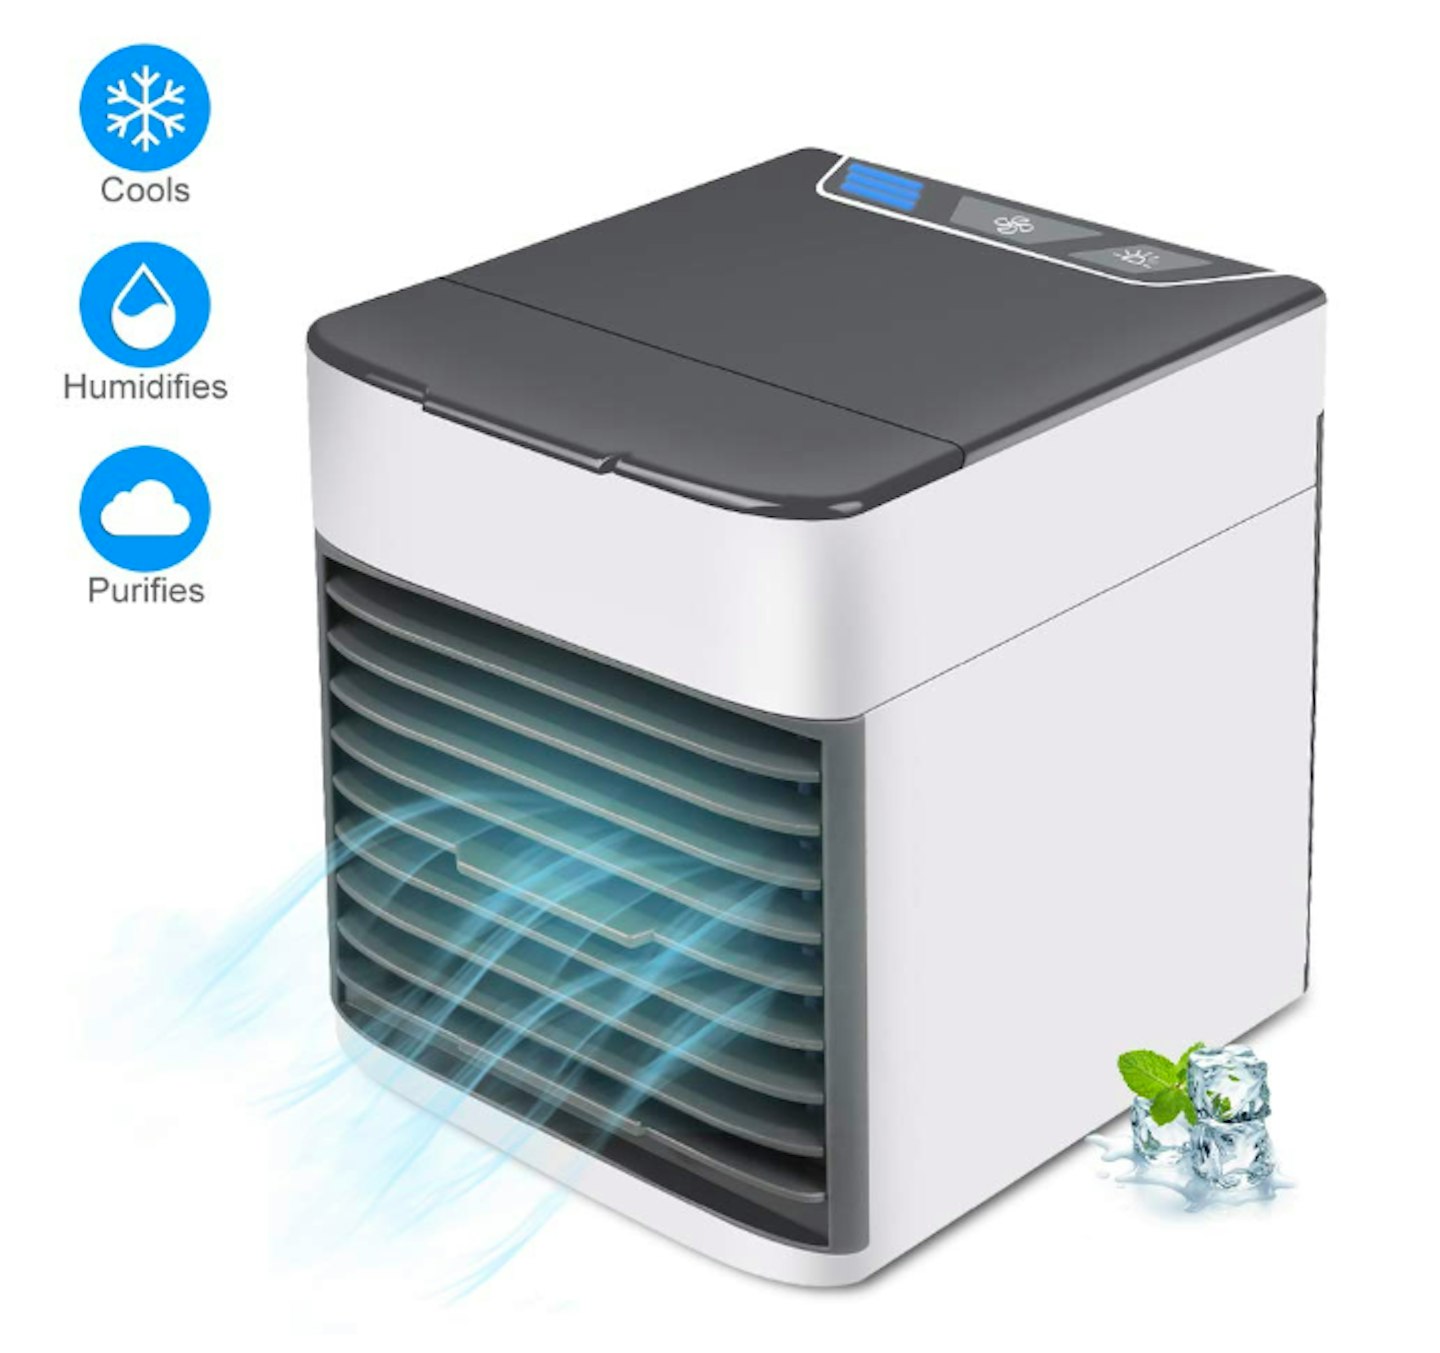 Harddo Air Cooler, 3-in-1 portable mini air conditioner, humidifier, and Purifier, 14.99